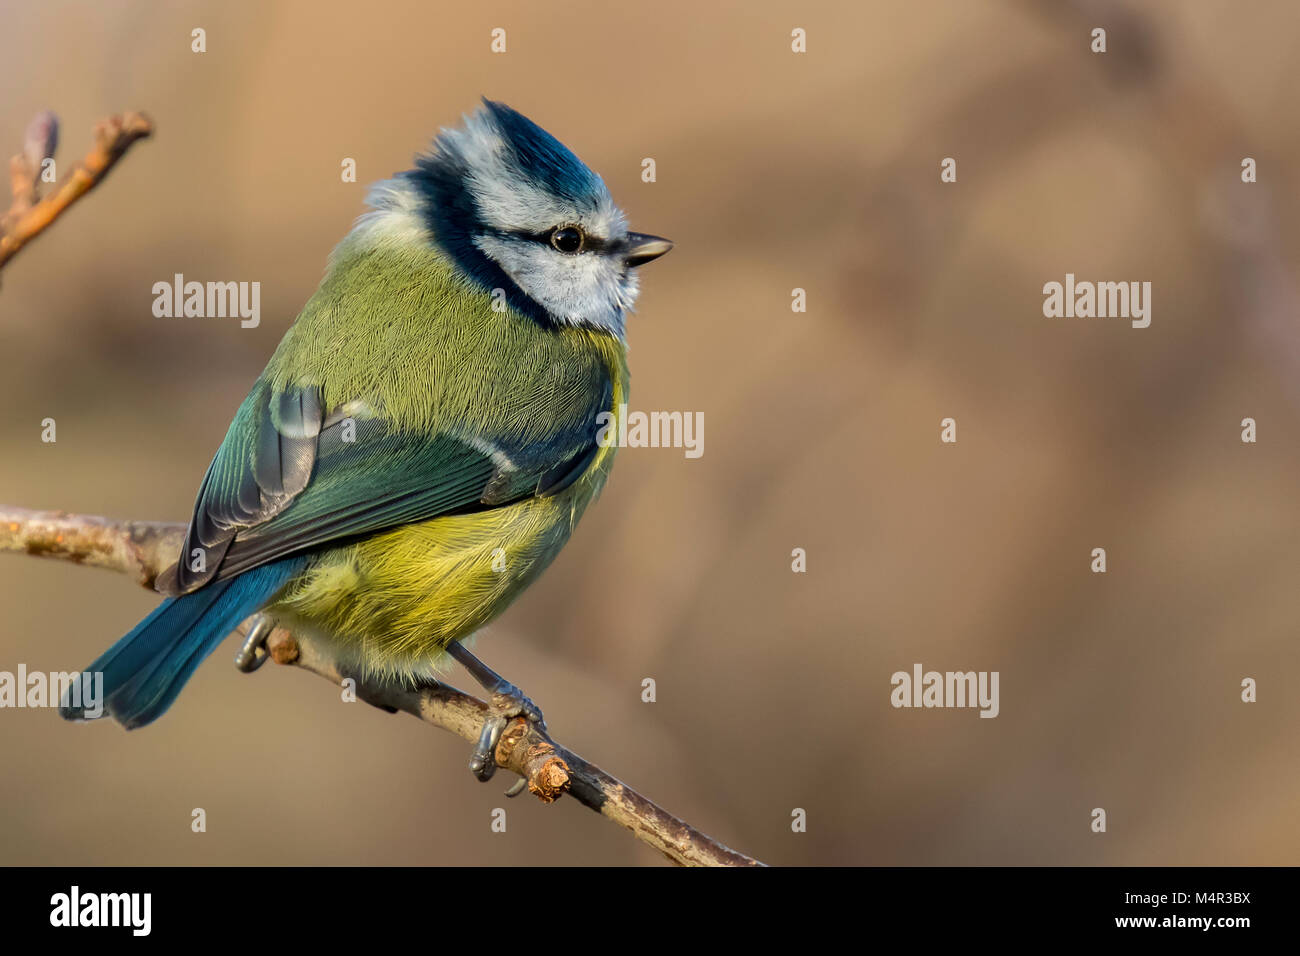 Blue tit looking Right on a Branch with great feather detail Stock Photo